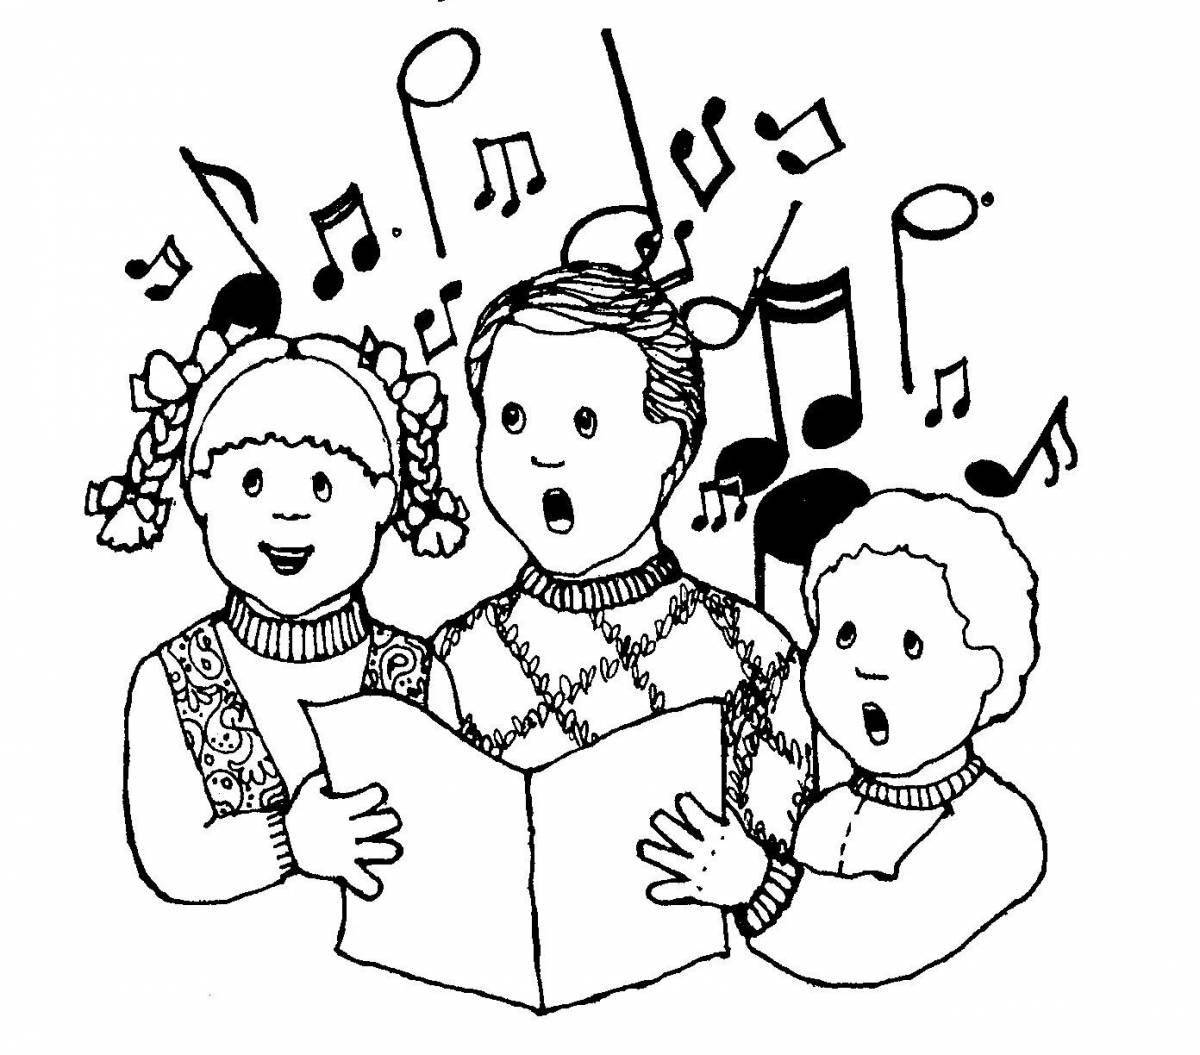 Fun coloring book for music lessons